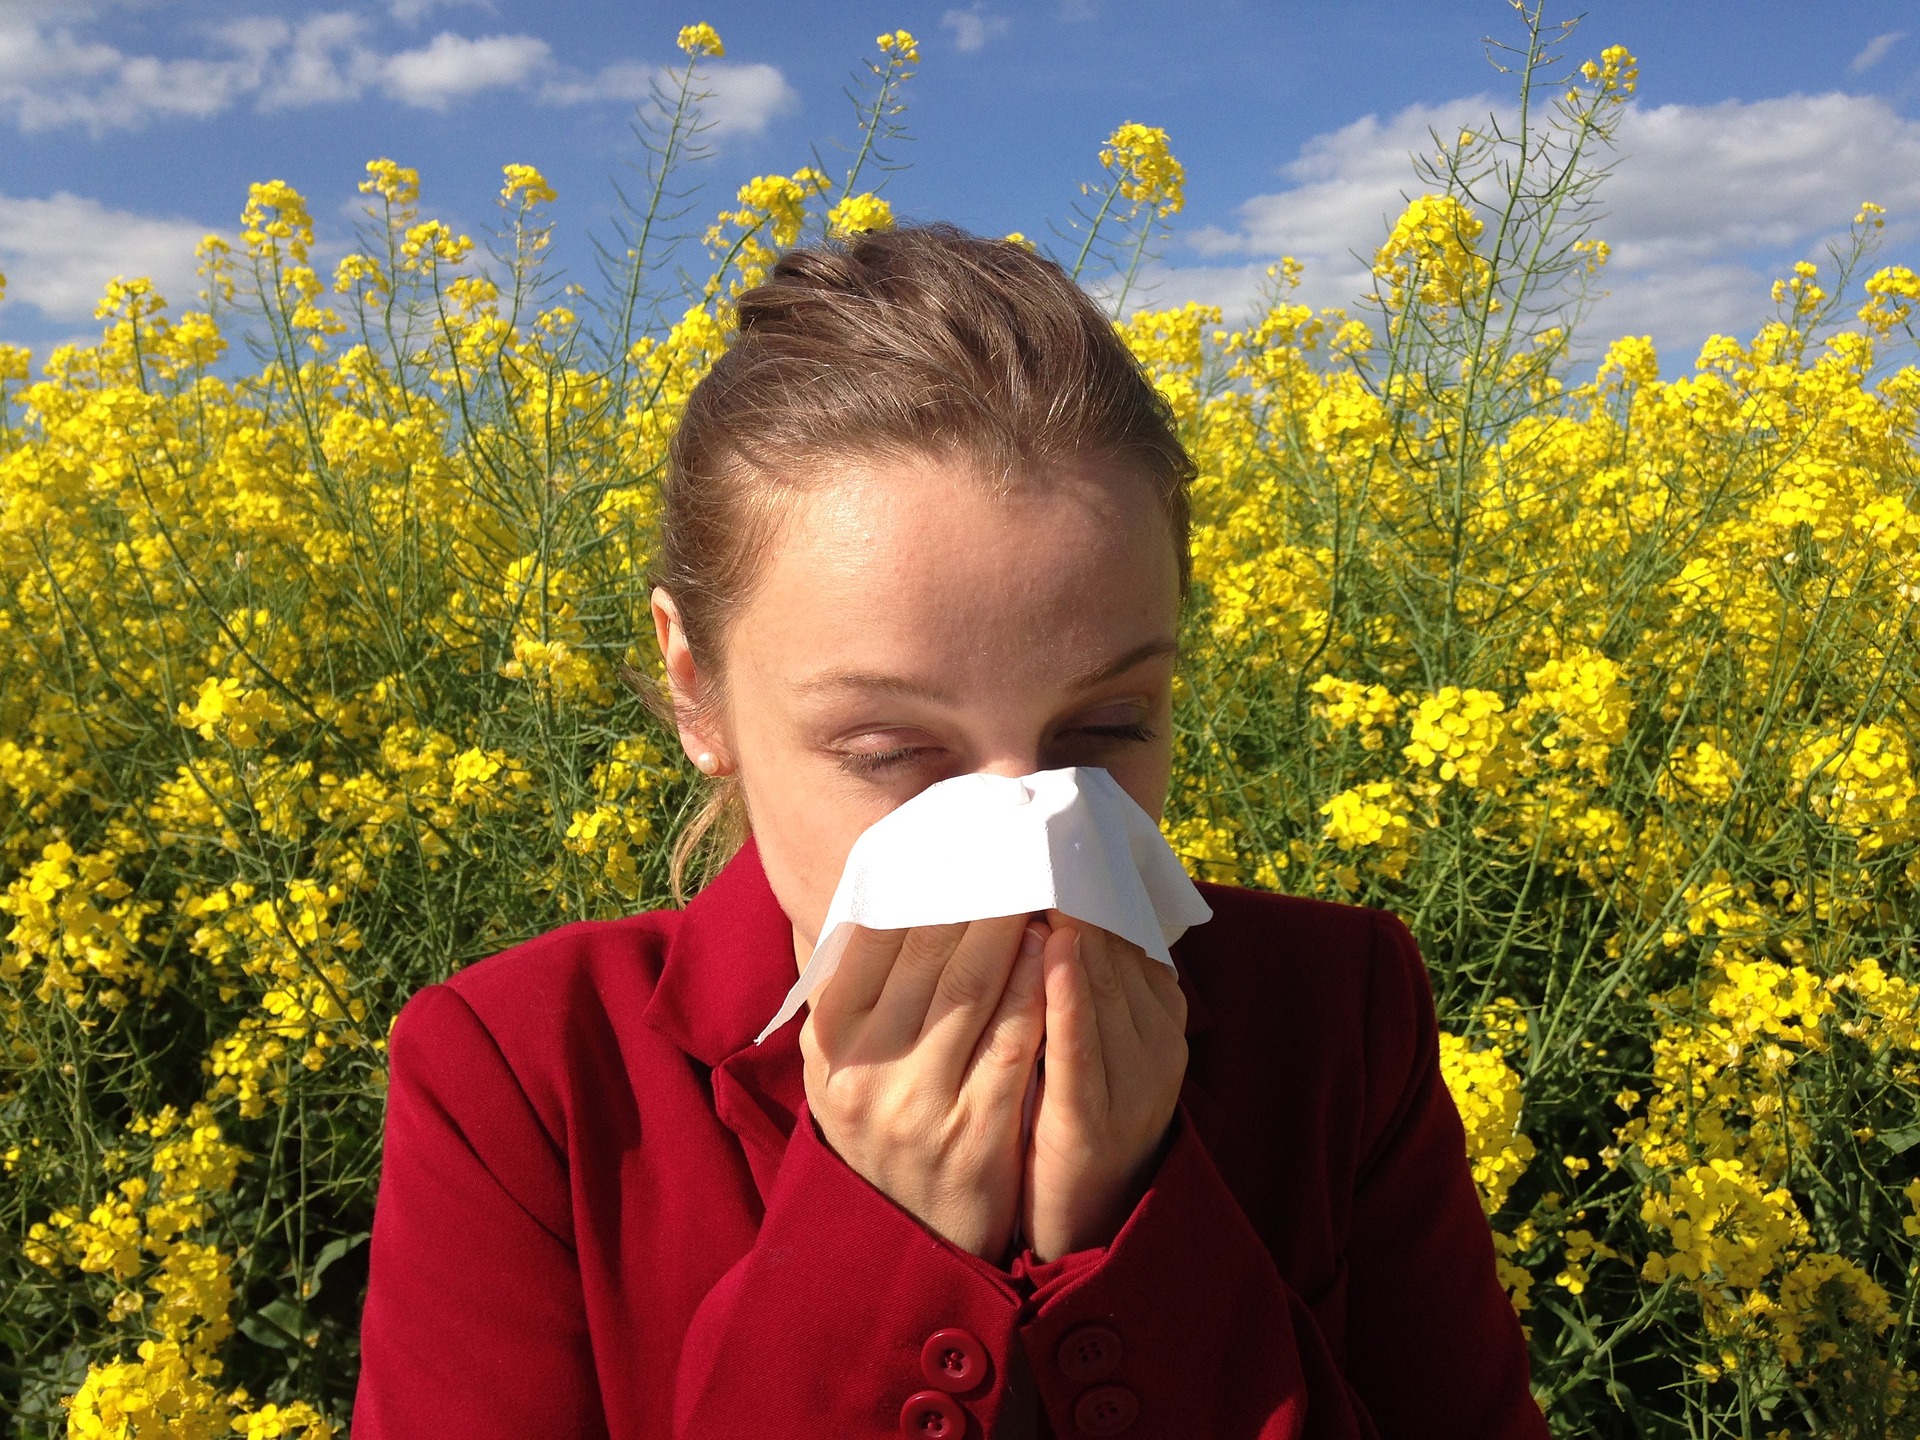 Common Complications of Untreated Allergies